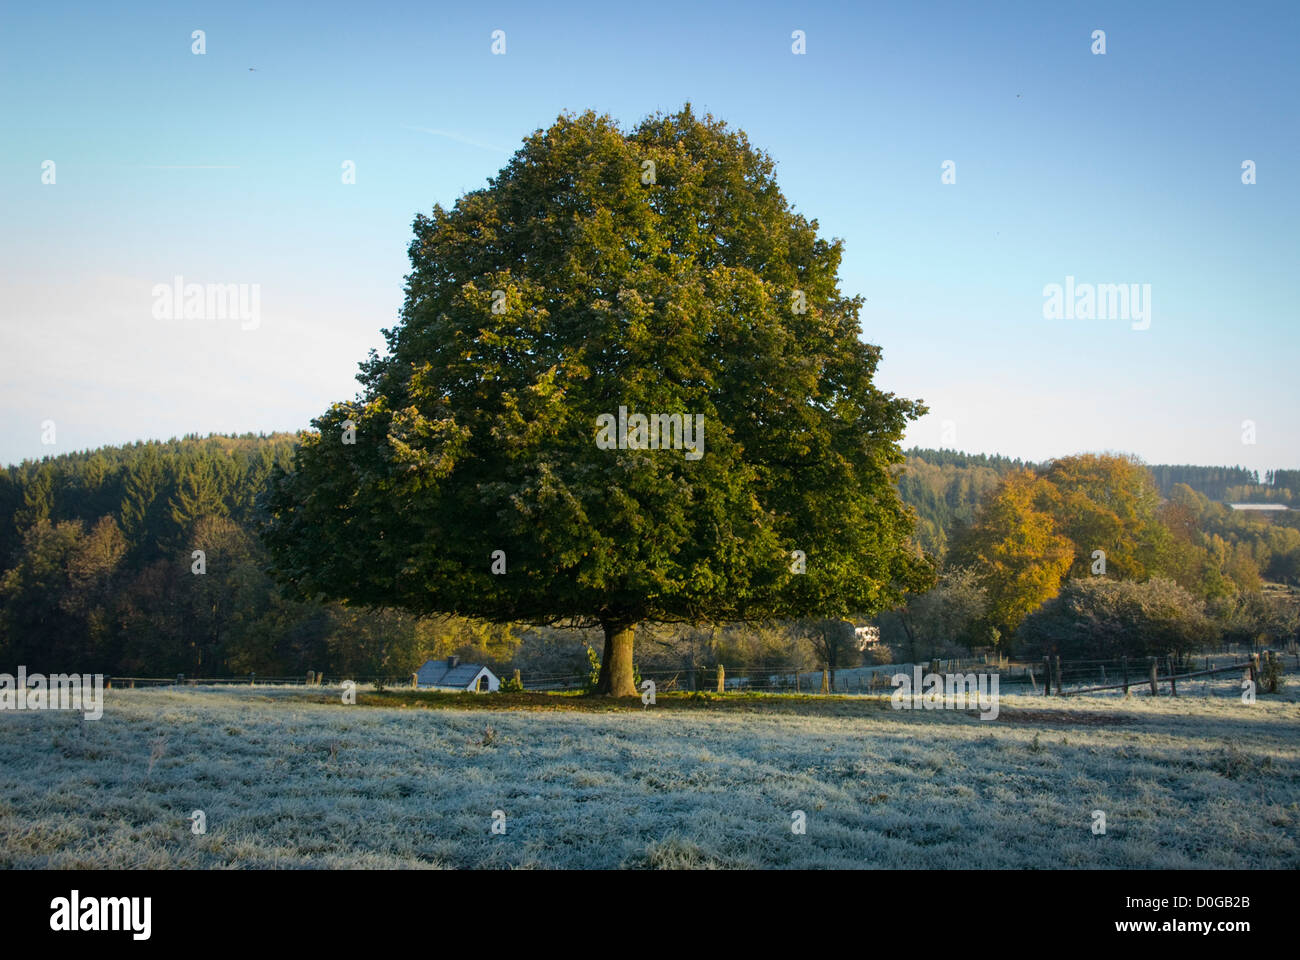 Landscape late autumn or beginning winter with trees in the Ardennes, Grandmenil Stock Photo